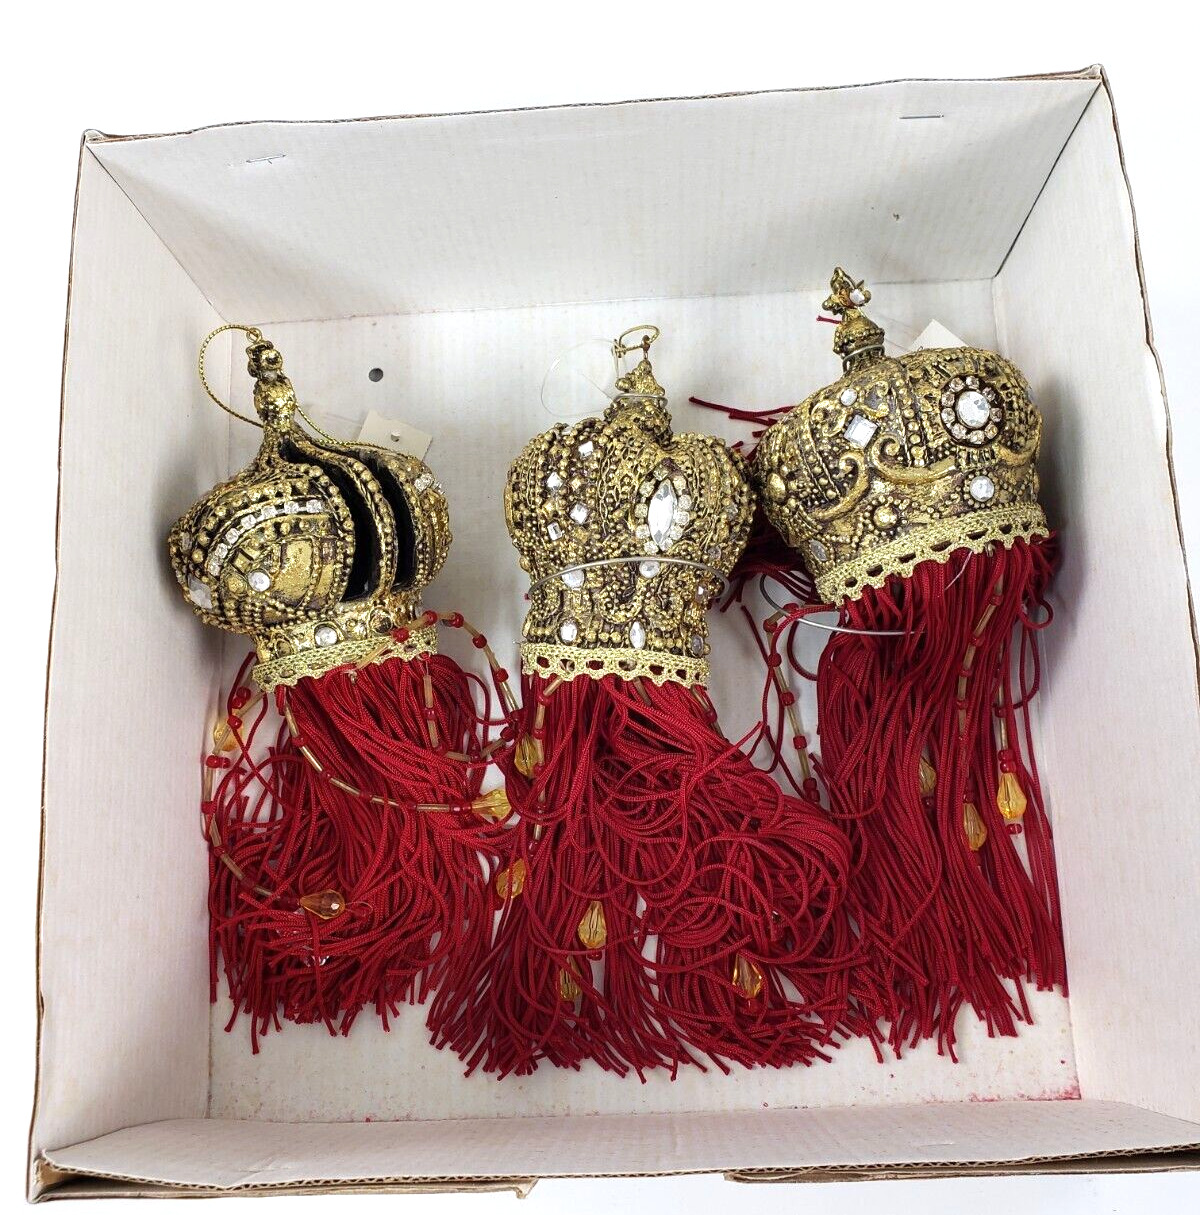 3 Dillards Trimmings Red And Gold Tassel ornate Christmas Ornaments  box